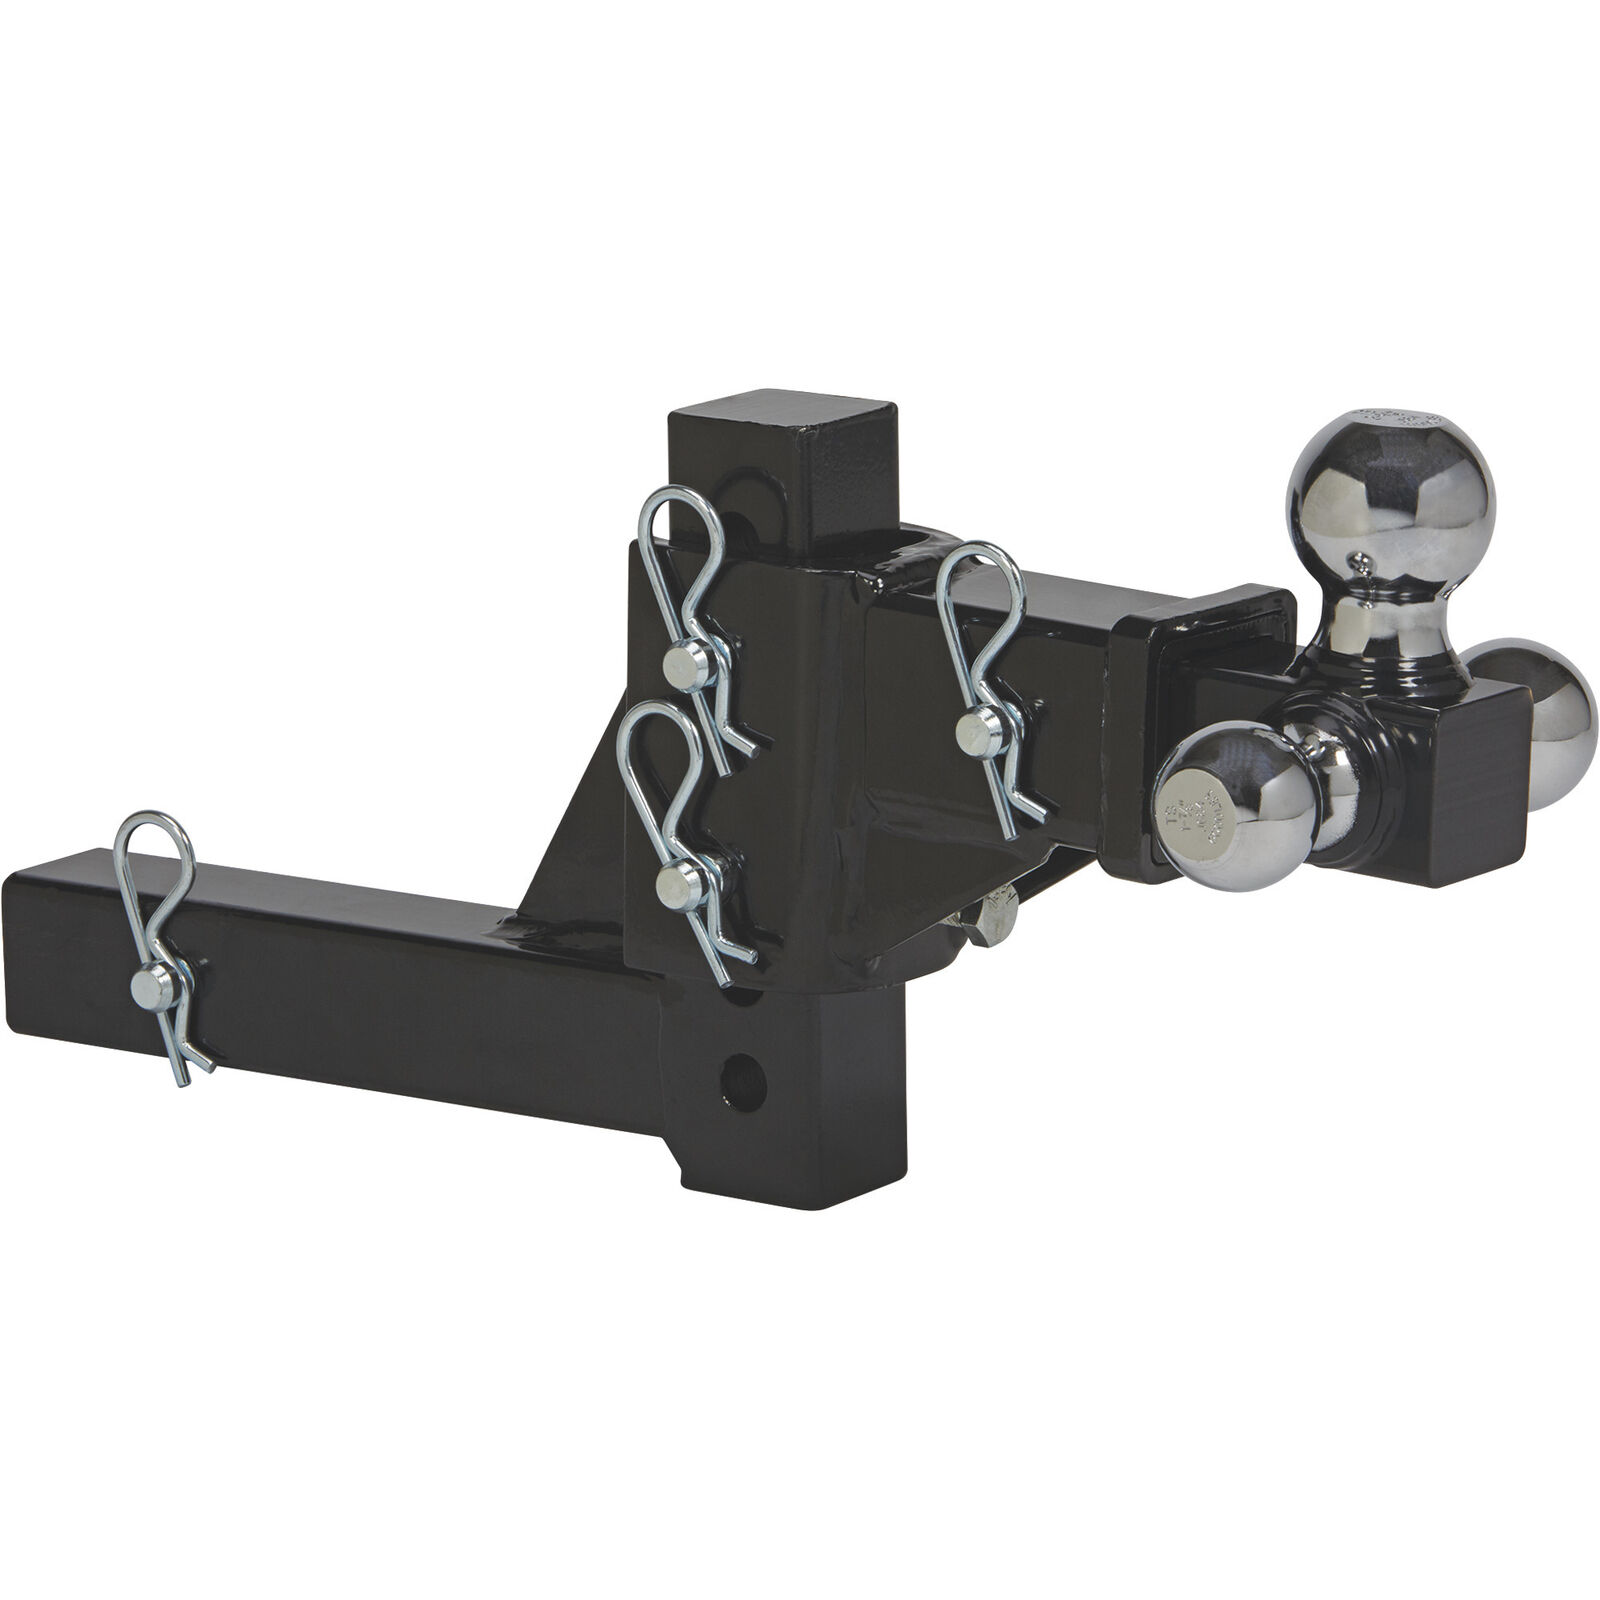 Ultra-Tow Adjustable TriBall Mount, 10,000-Lb. Tow Weight